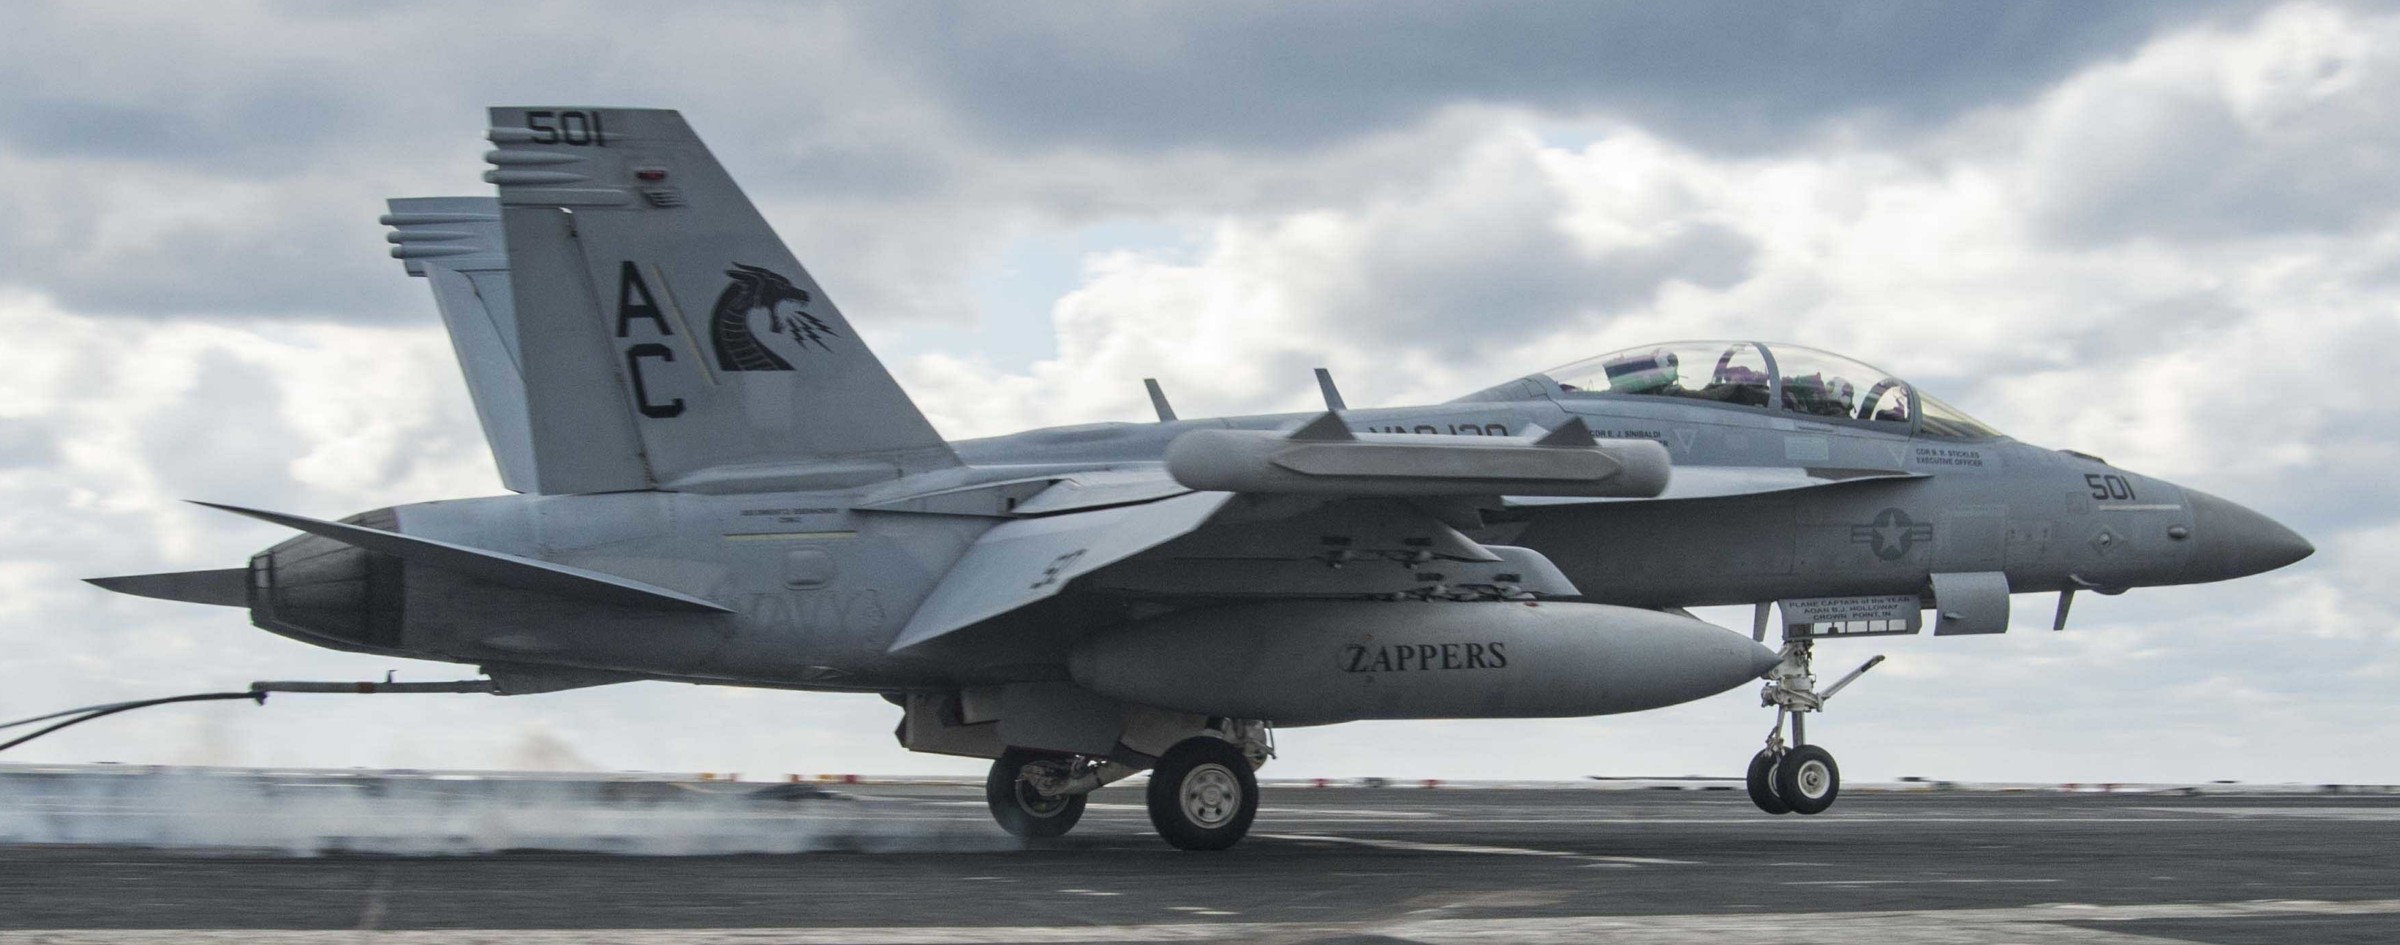 vaq-130 zappers electronic attack squadron vaqron us navy boeing ea-18g growler aircraft carrier air wing cvw-3 uss dwight d. eisenhower cvn-69 117